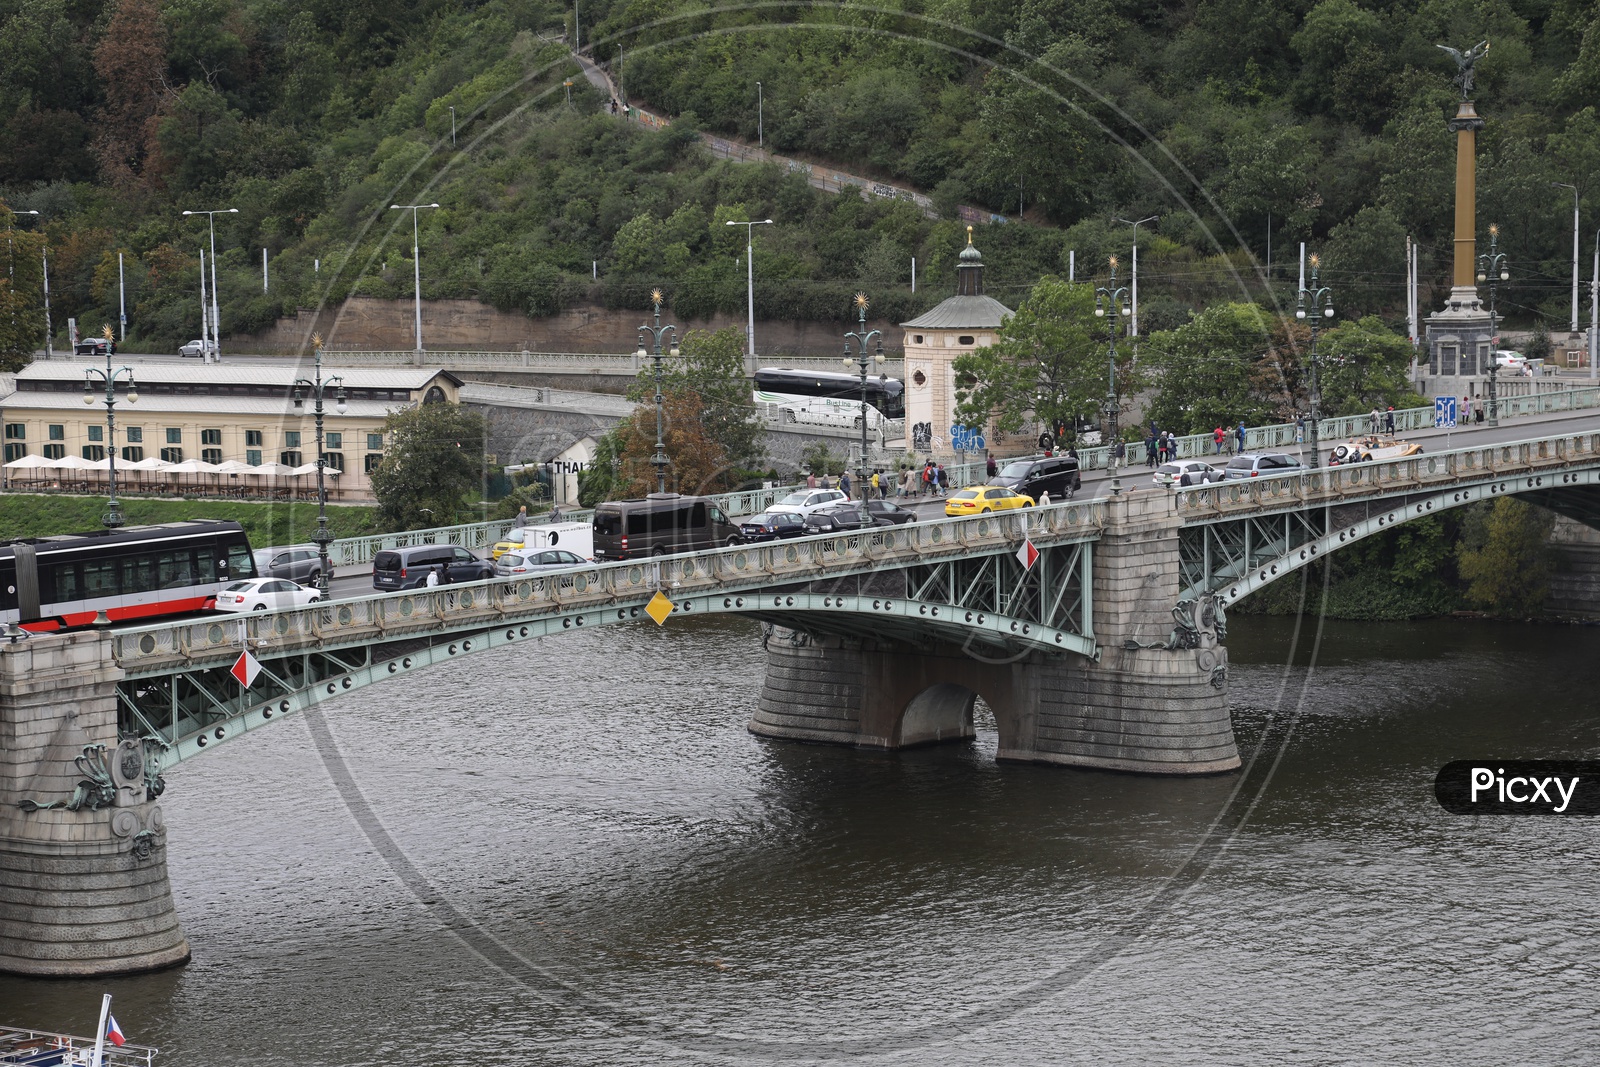 vehicles move on the bridge which is above the river